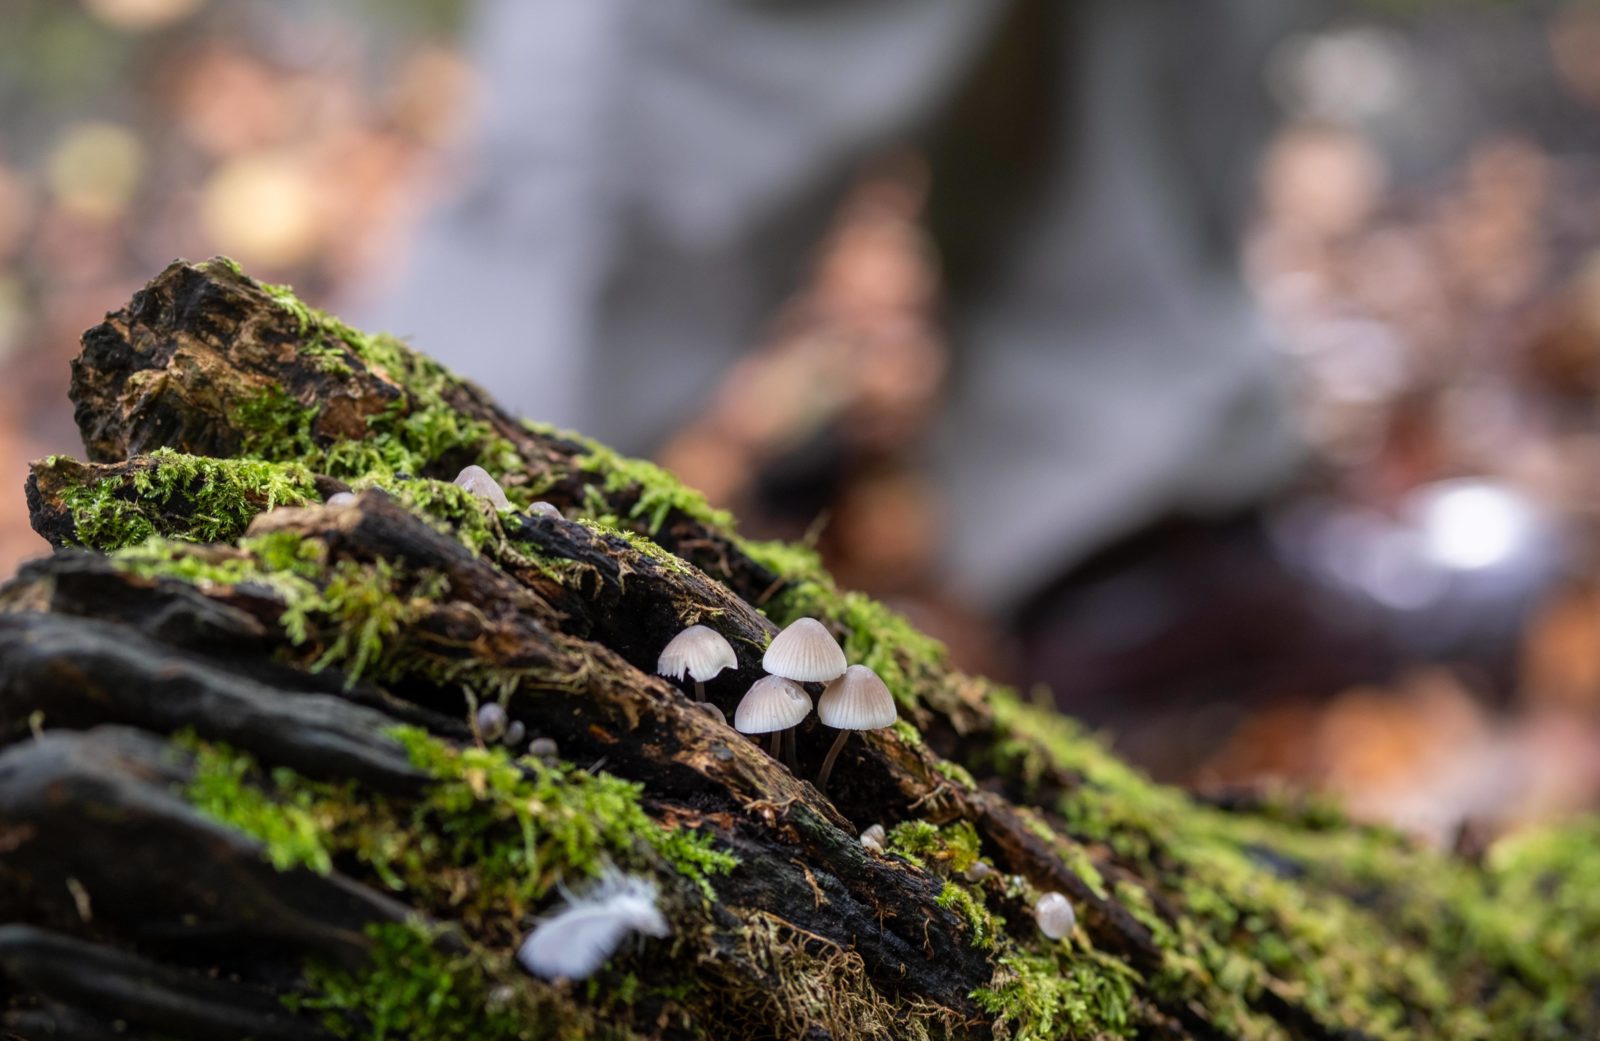 A log is photographed up close that is covered in moss and has 4 tiny mushrooms growing out of it.